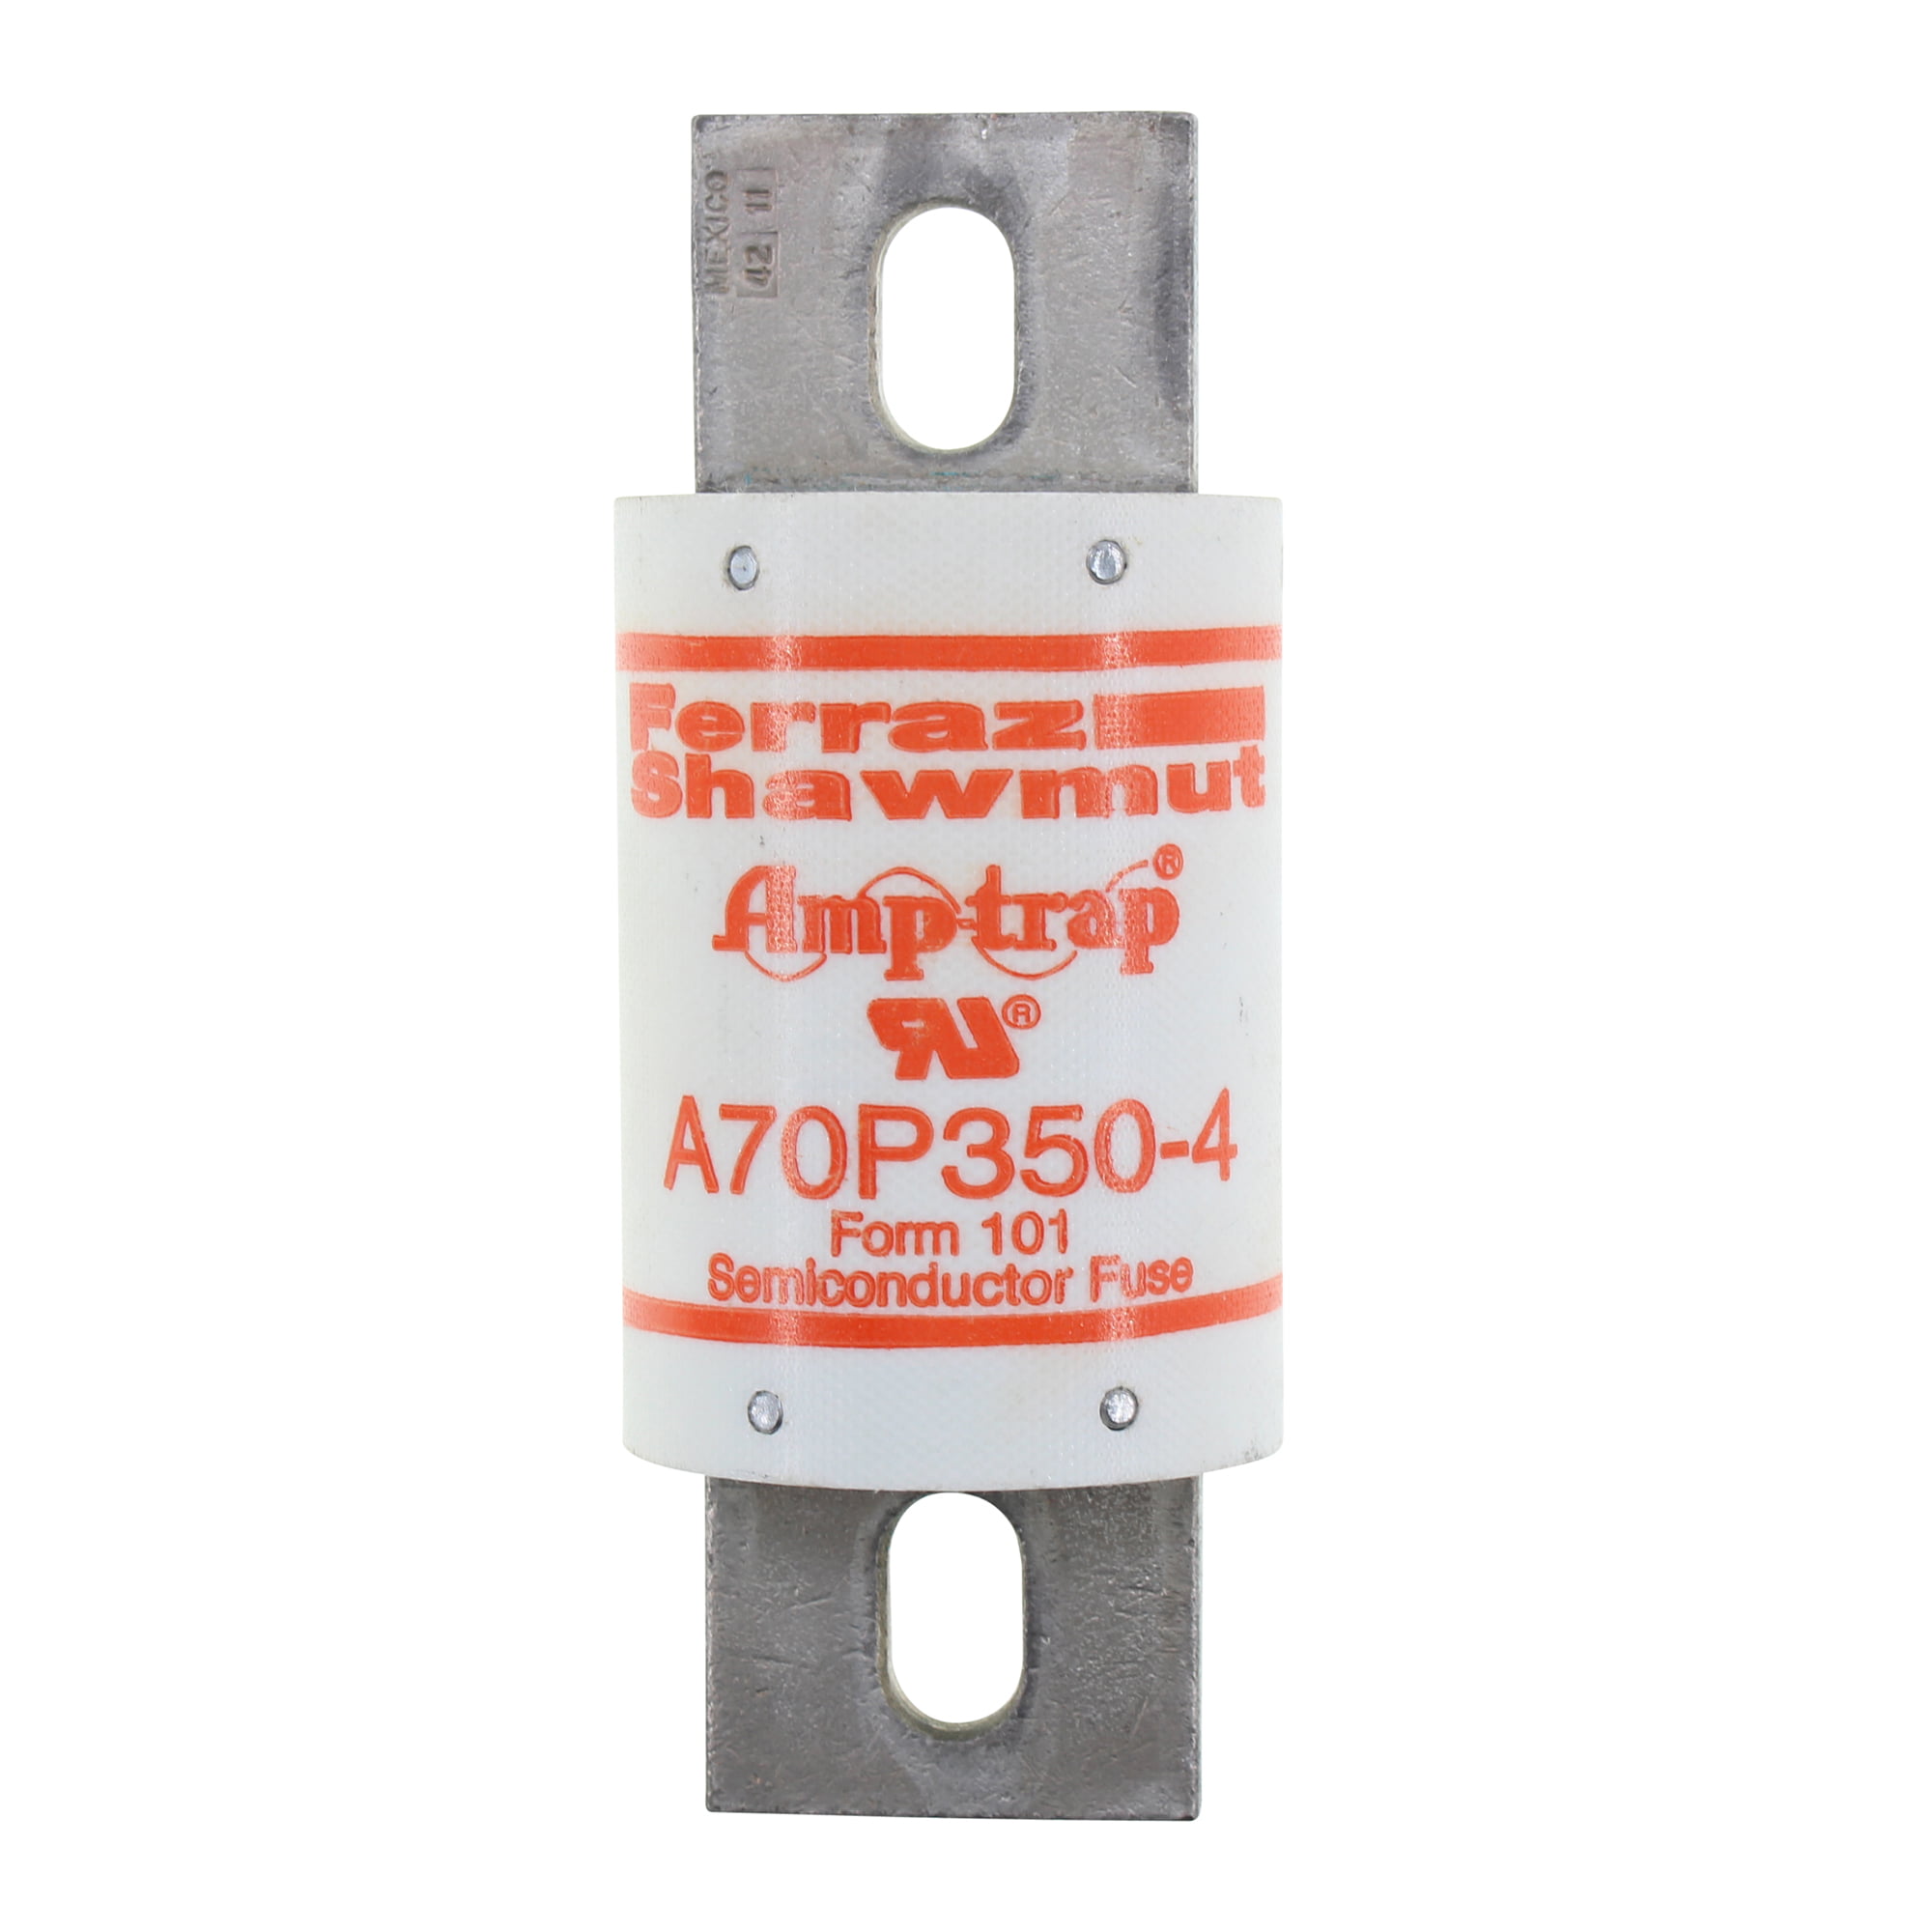 1-1/2 Diameter x 5-3/32 Length Mersen A70P Amp-Trap Form 101 Semiconductor Protection Fuse with Trigger Actuator 700VAC/650VDC 100kA AC/100kA DC 125 Ampere